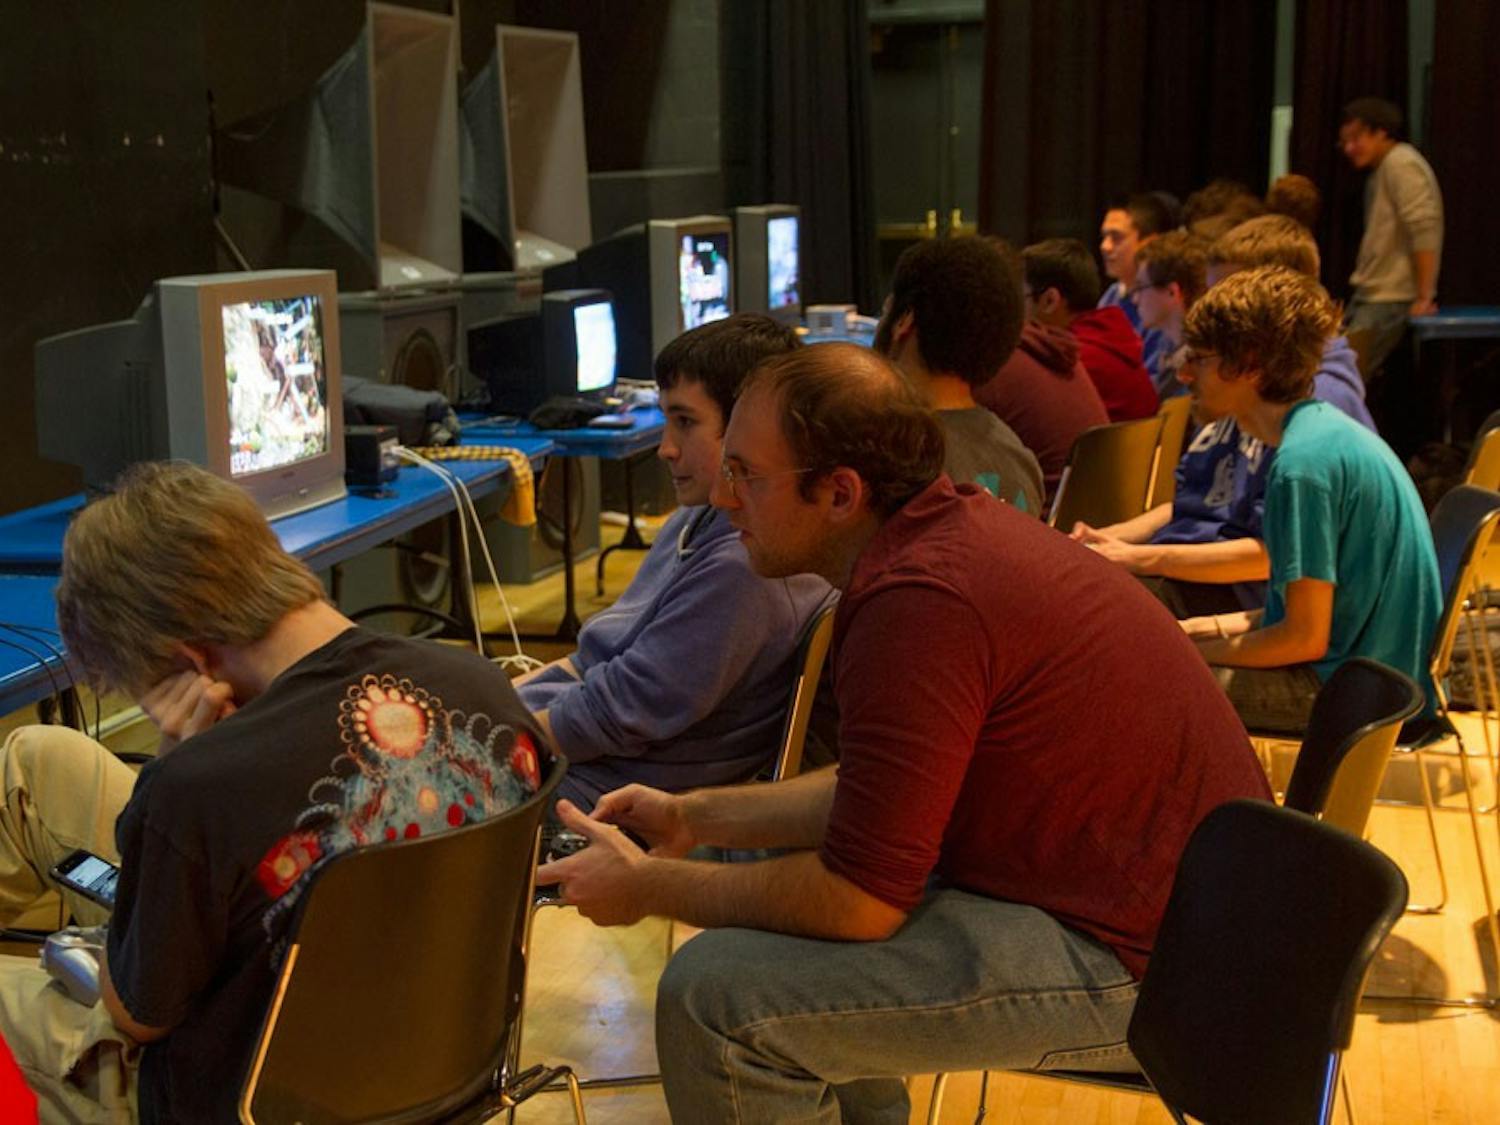 The UB Smash&nbsp;Club is a group of gamers who bond over their love of video games. The club meets every Wednesday in the Student Union from 8 p.m. to 11:30 p.m. to compete and improve their Smash Bros. skills.&nbsp;